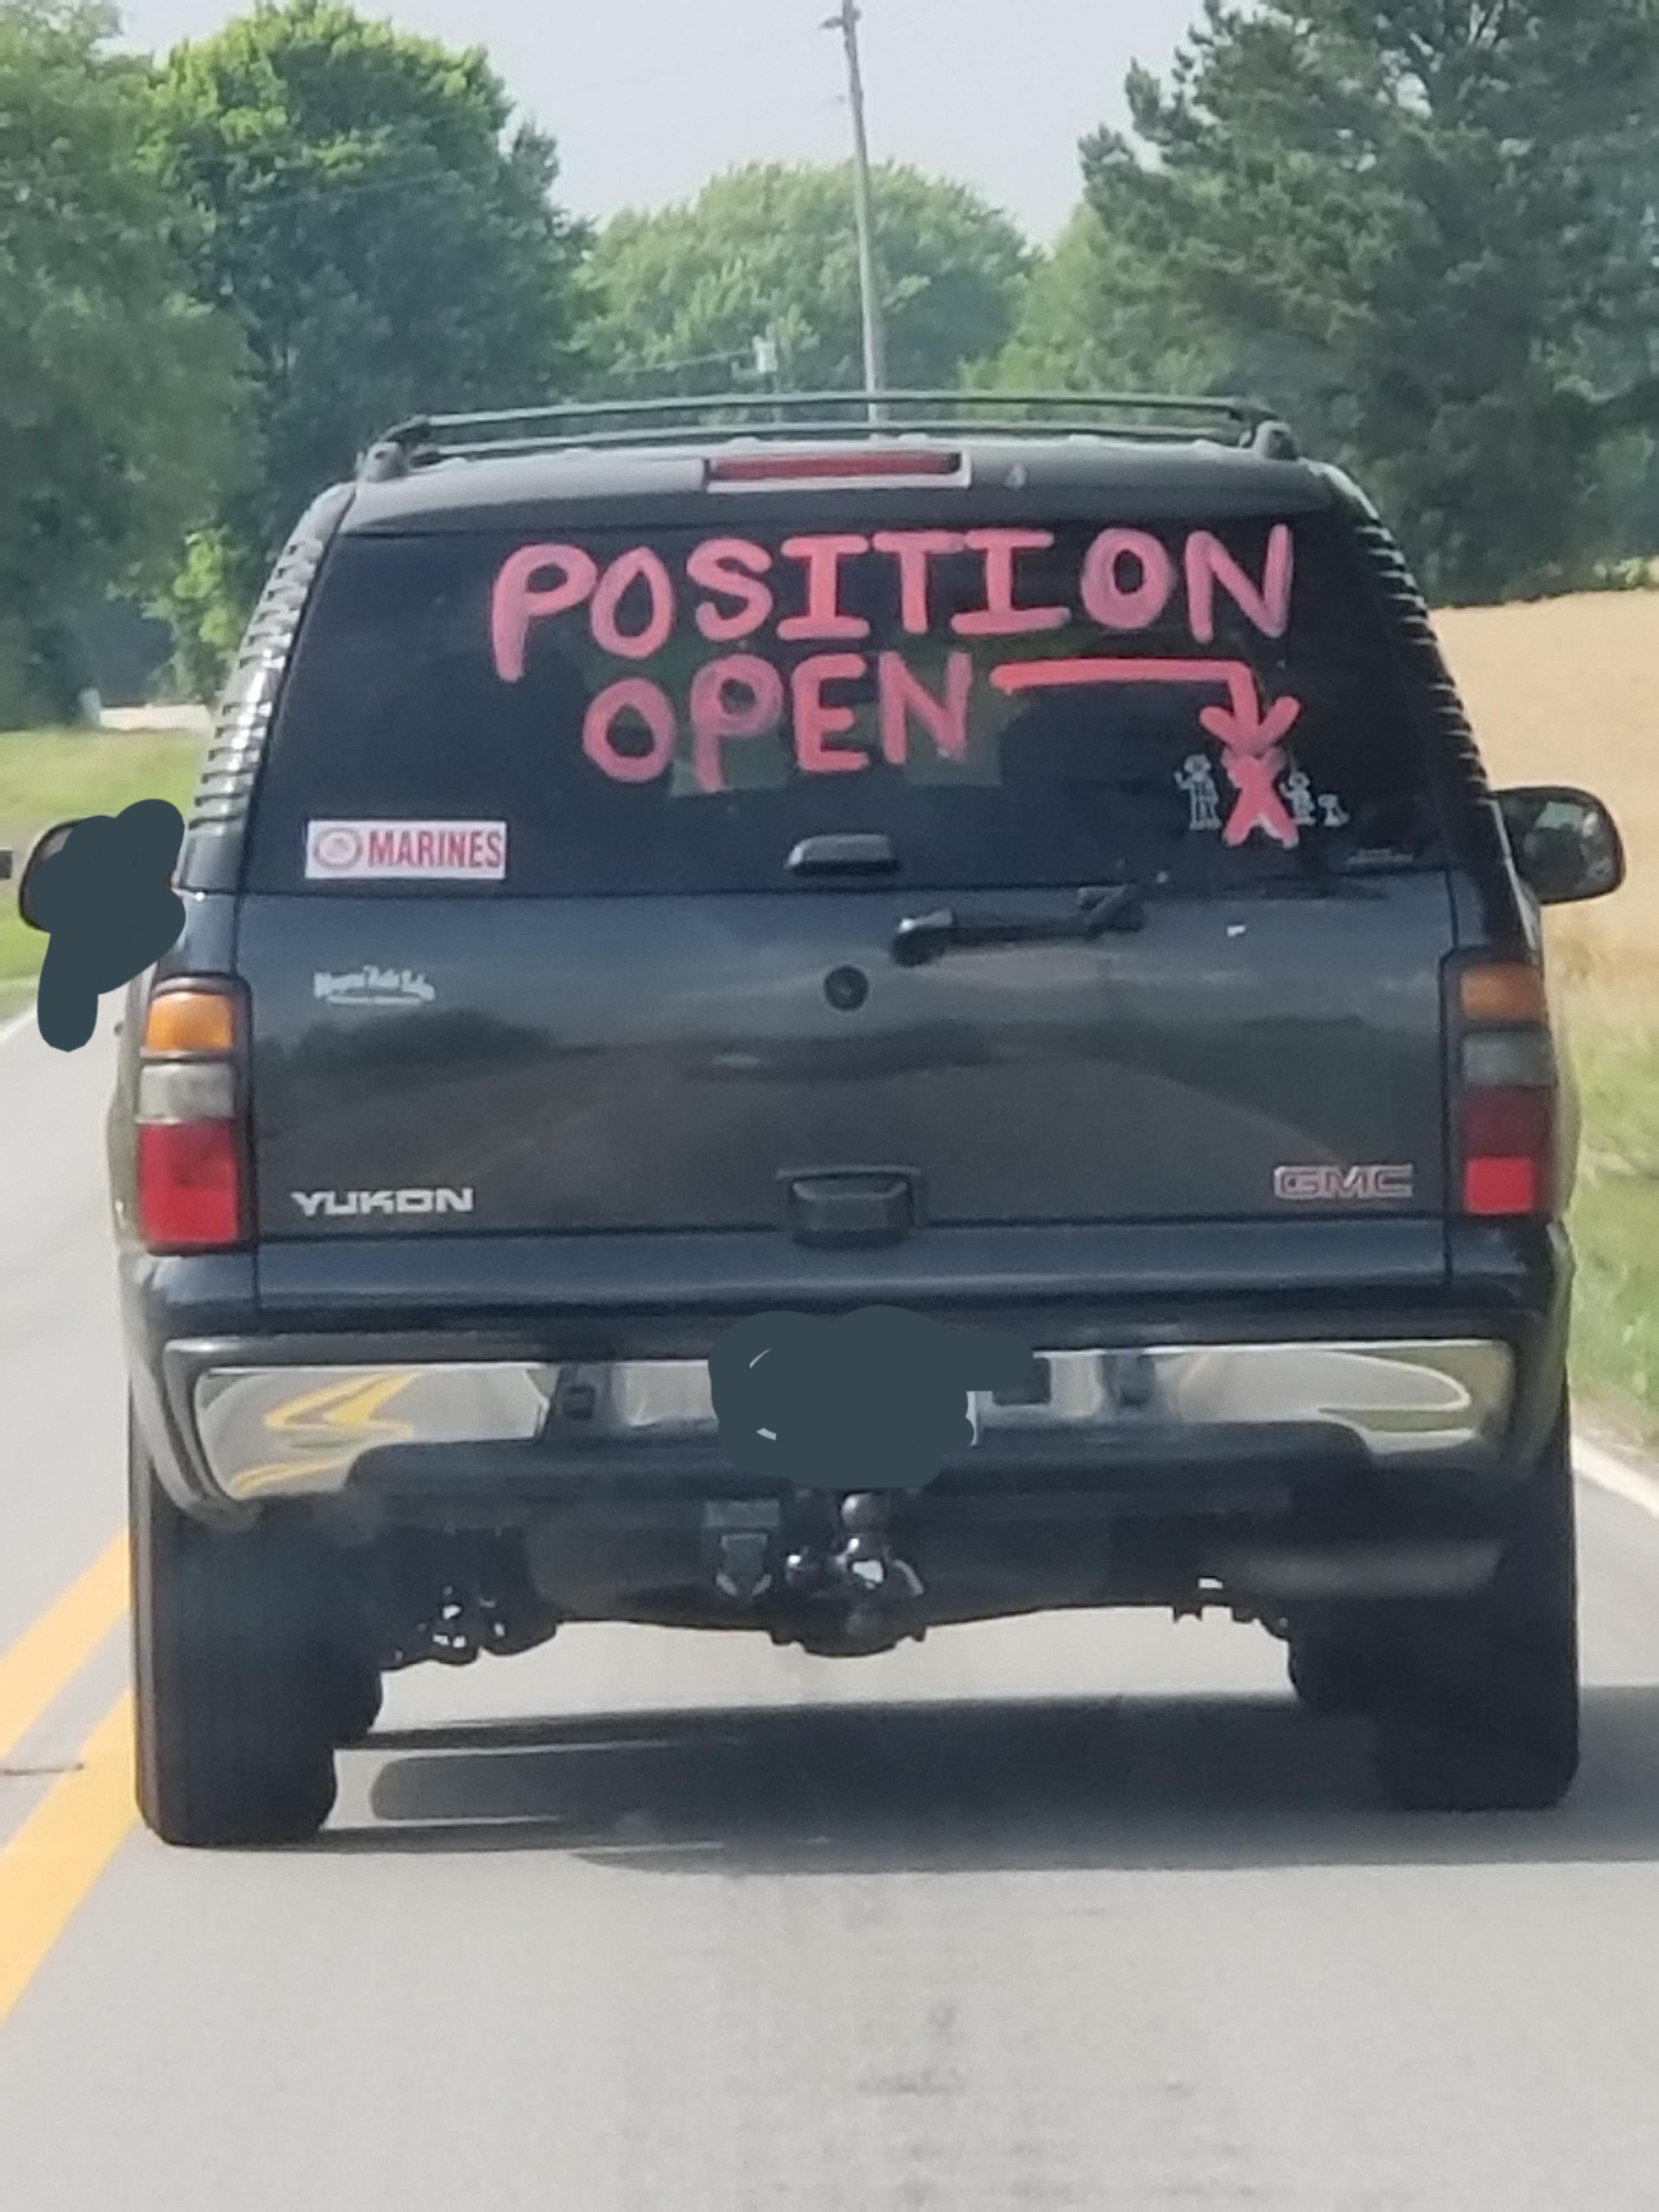 Ended up behind this guy today